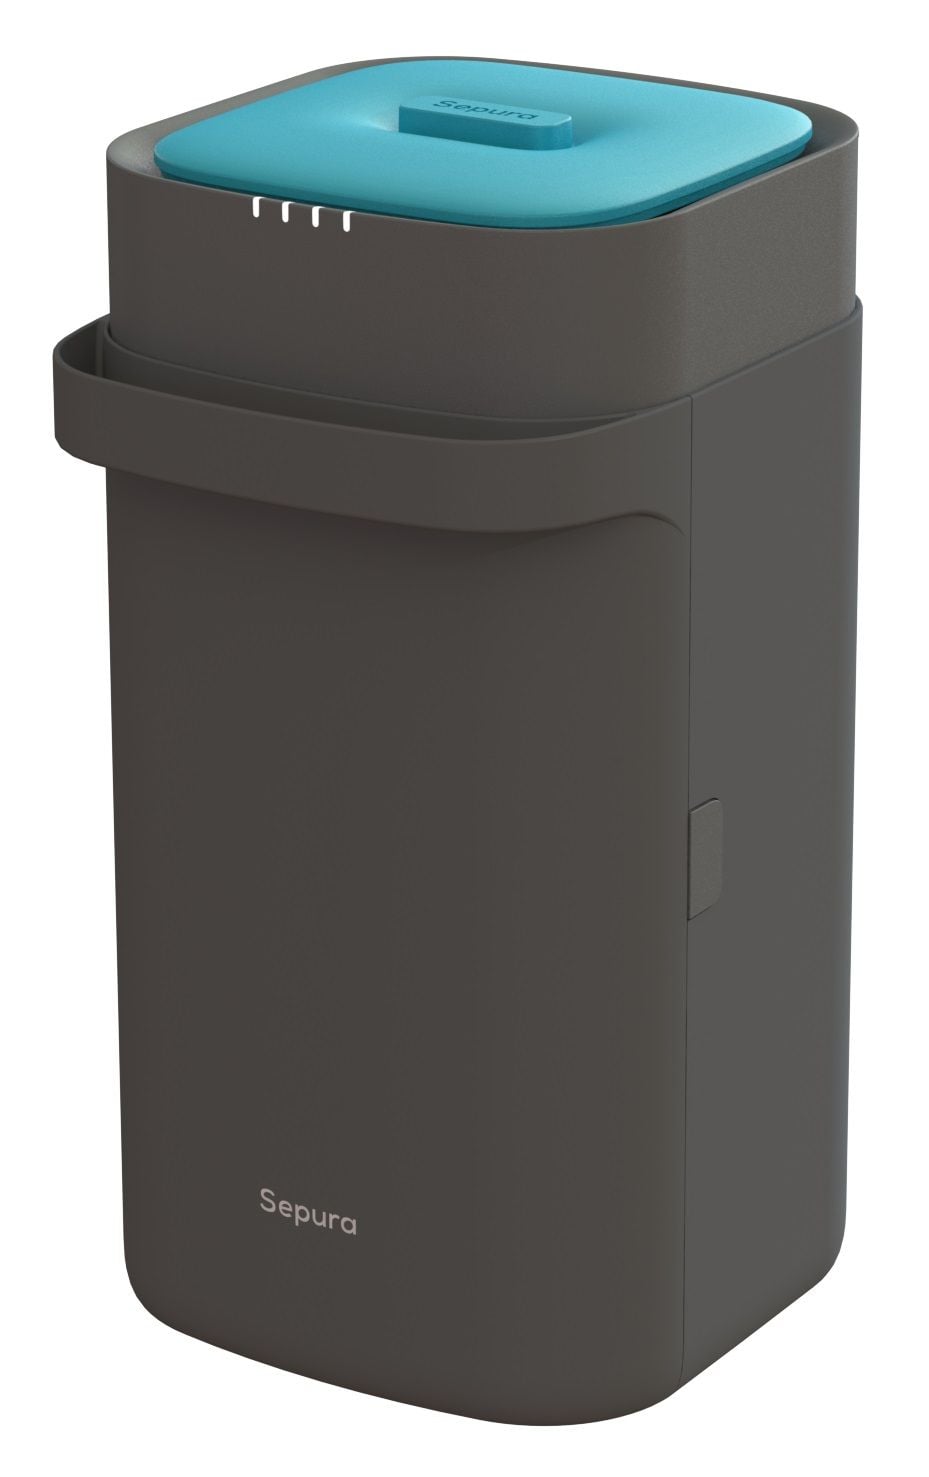 The Sepura Automatic Composting System 